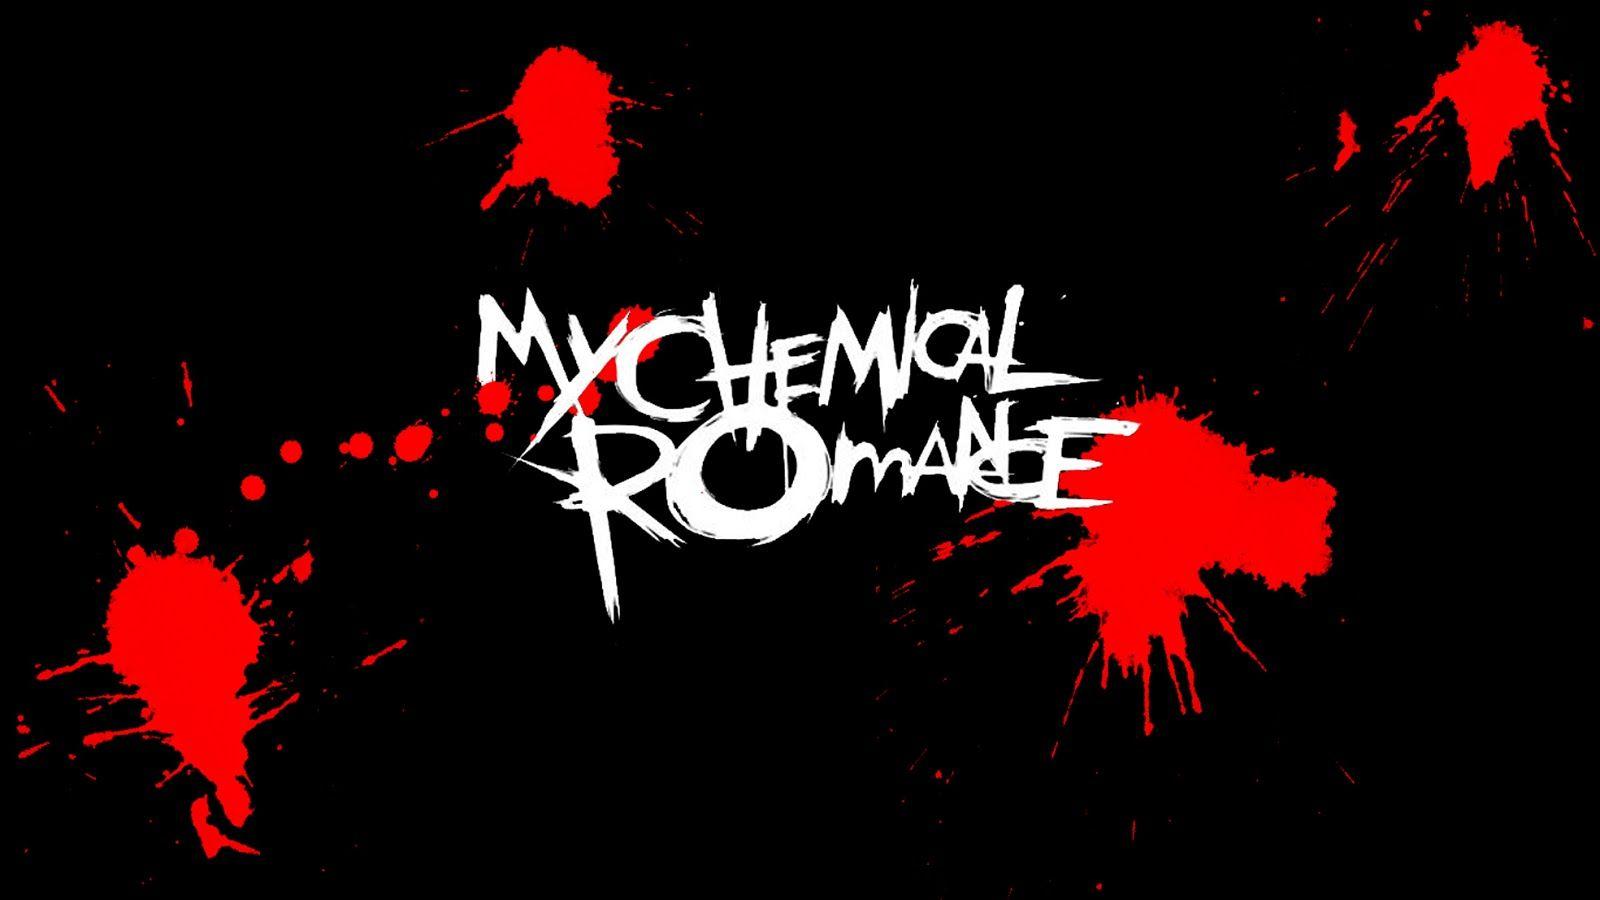 Emo Bandzzzz (mostly brendon urie) image My Chemical Romance